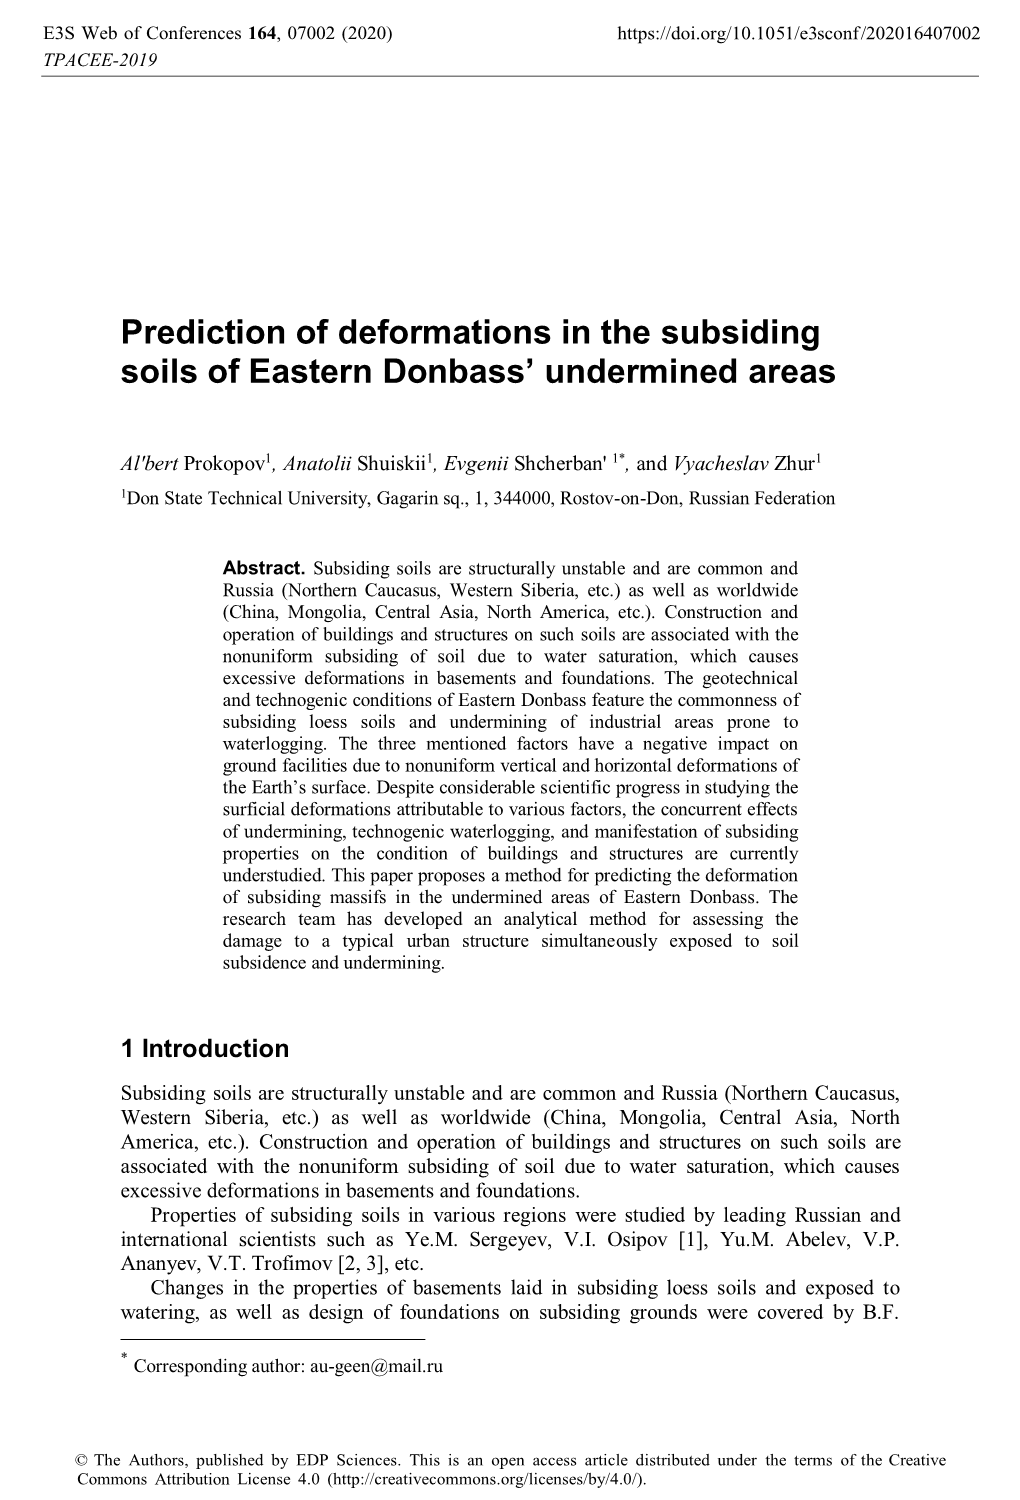 Prediction of Deformations in the Subsiding Soils of Eastern Donbass’ Undermined Areas